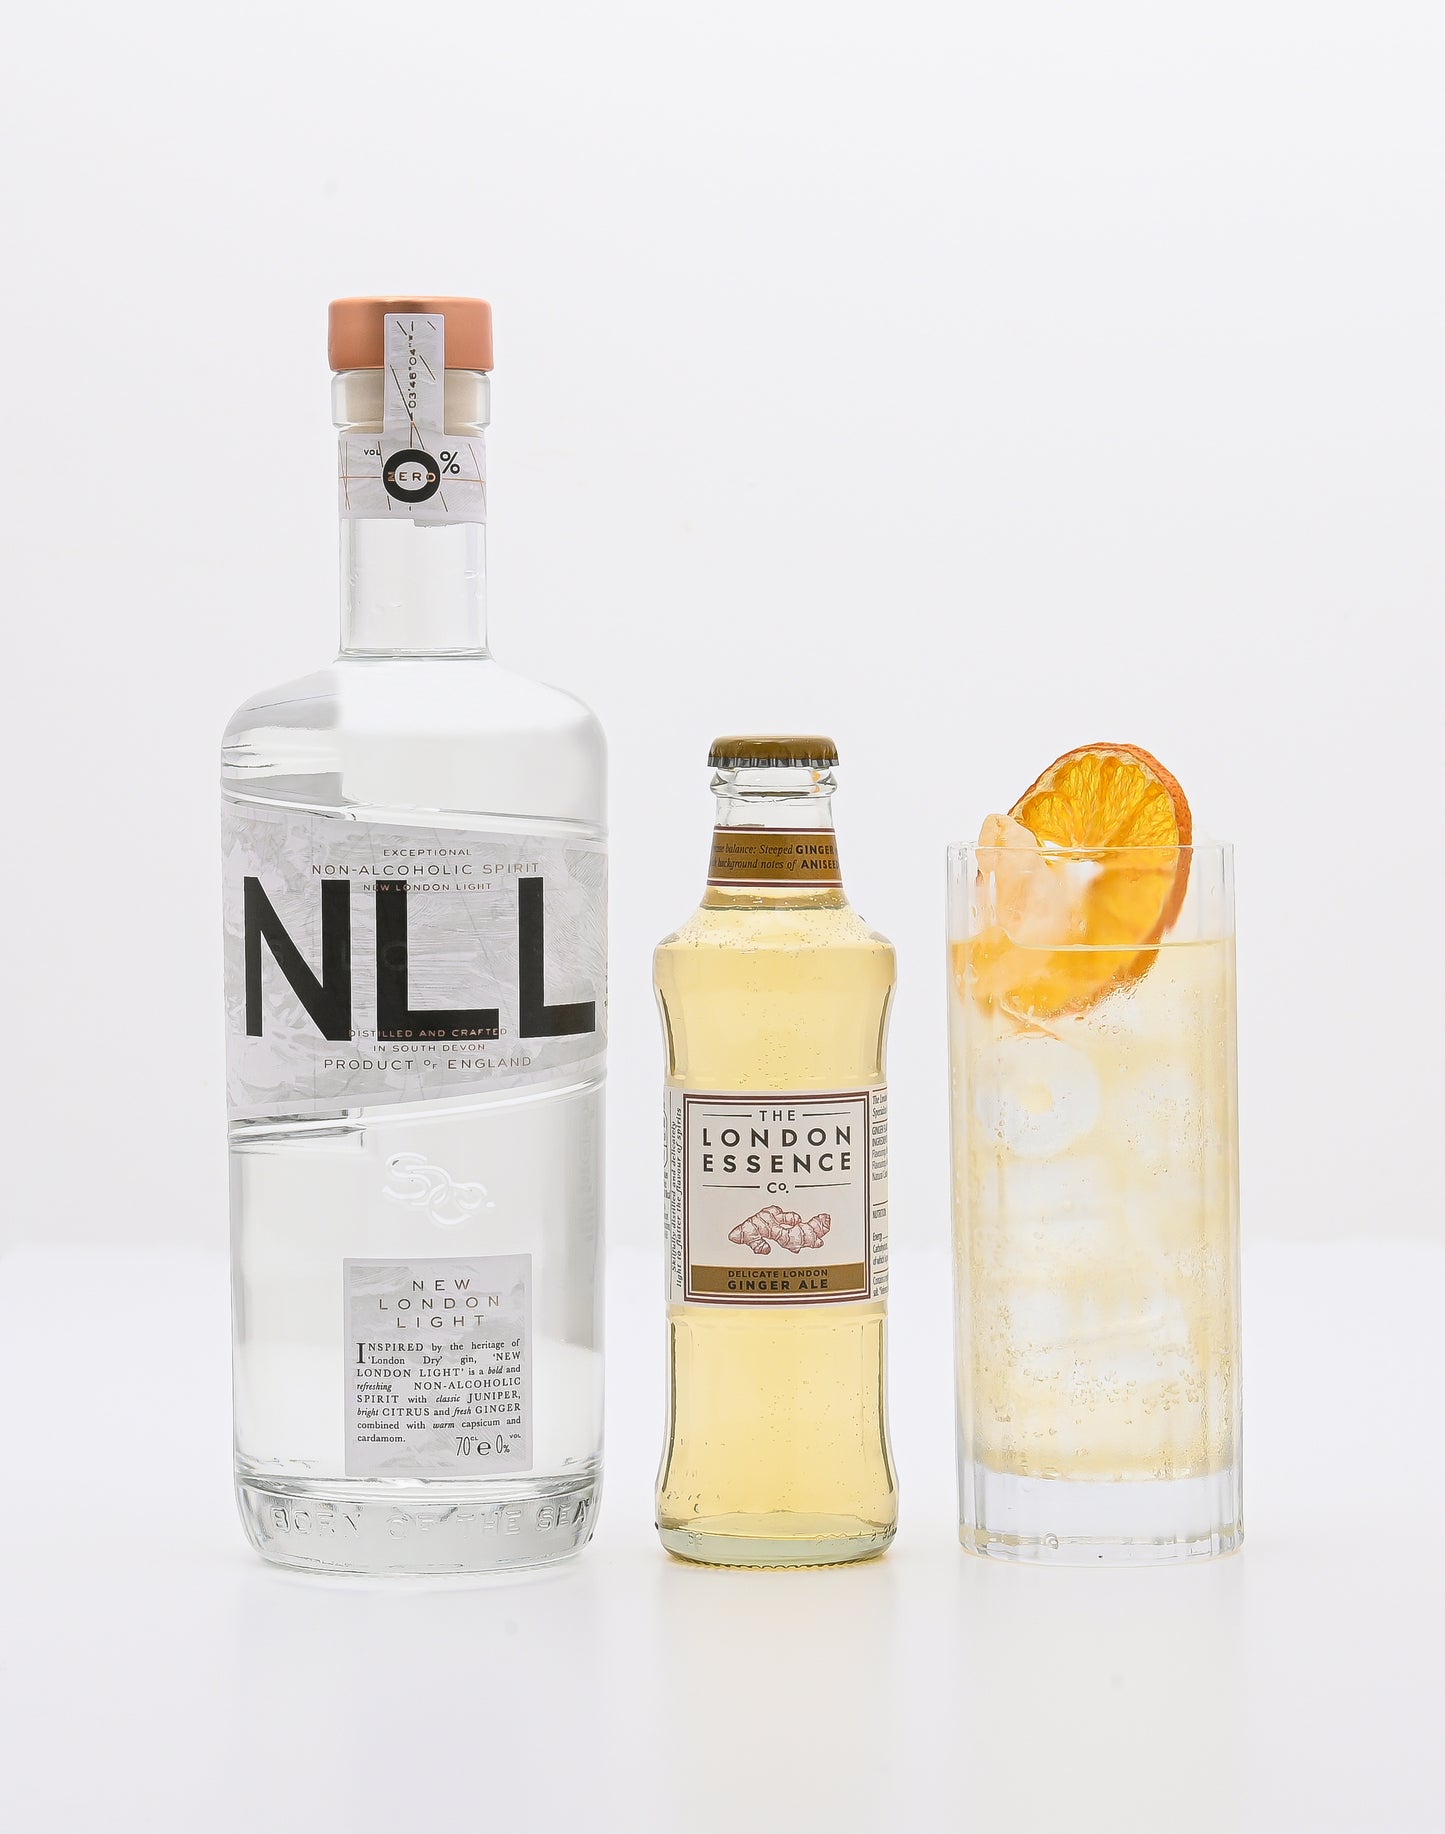 New London Light First Light Non-Alcoholic Gin